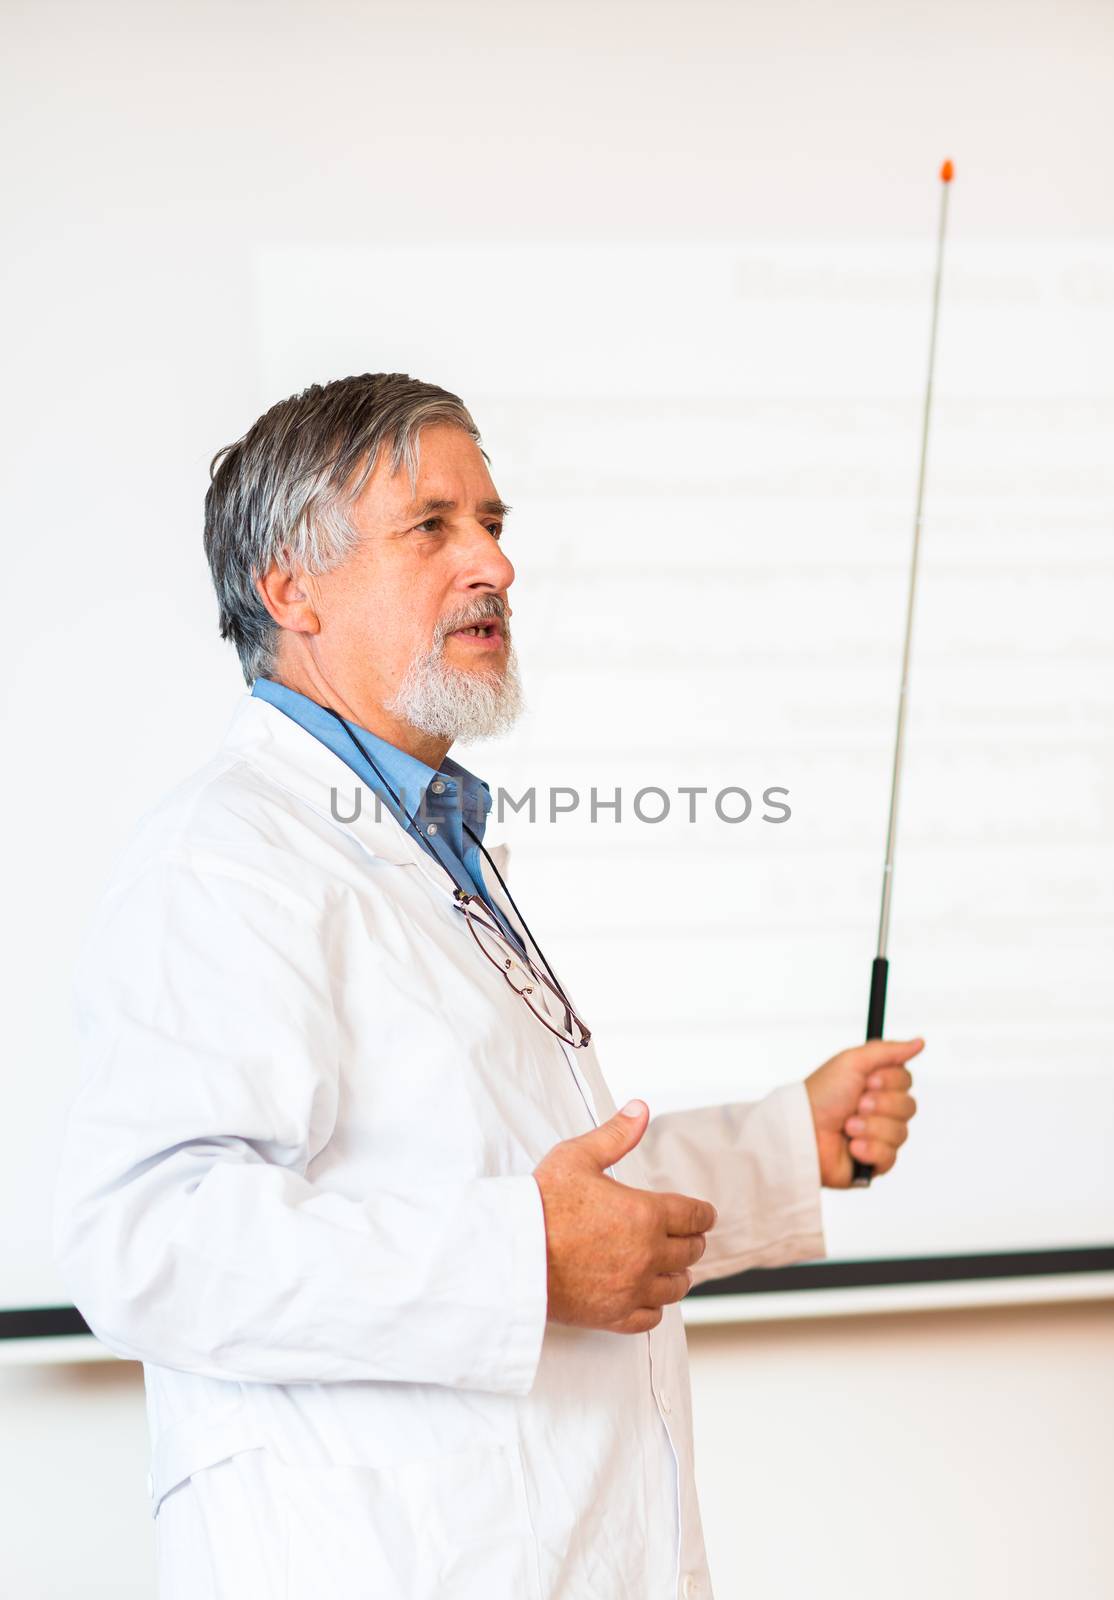 Senior chemistry professor giving a lecture in front of classroom full of students (shallow DOF; color toned image)